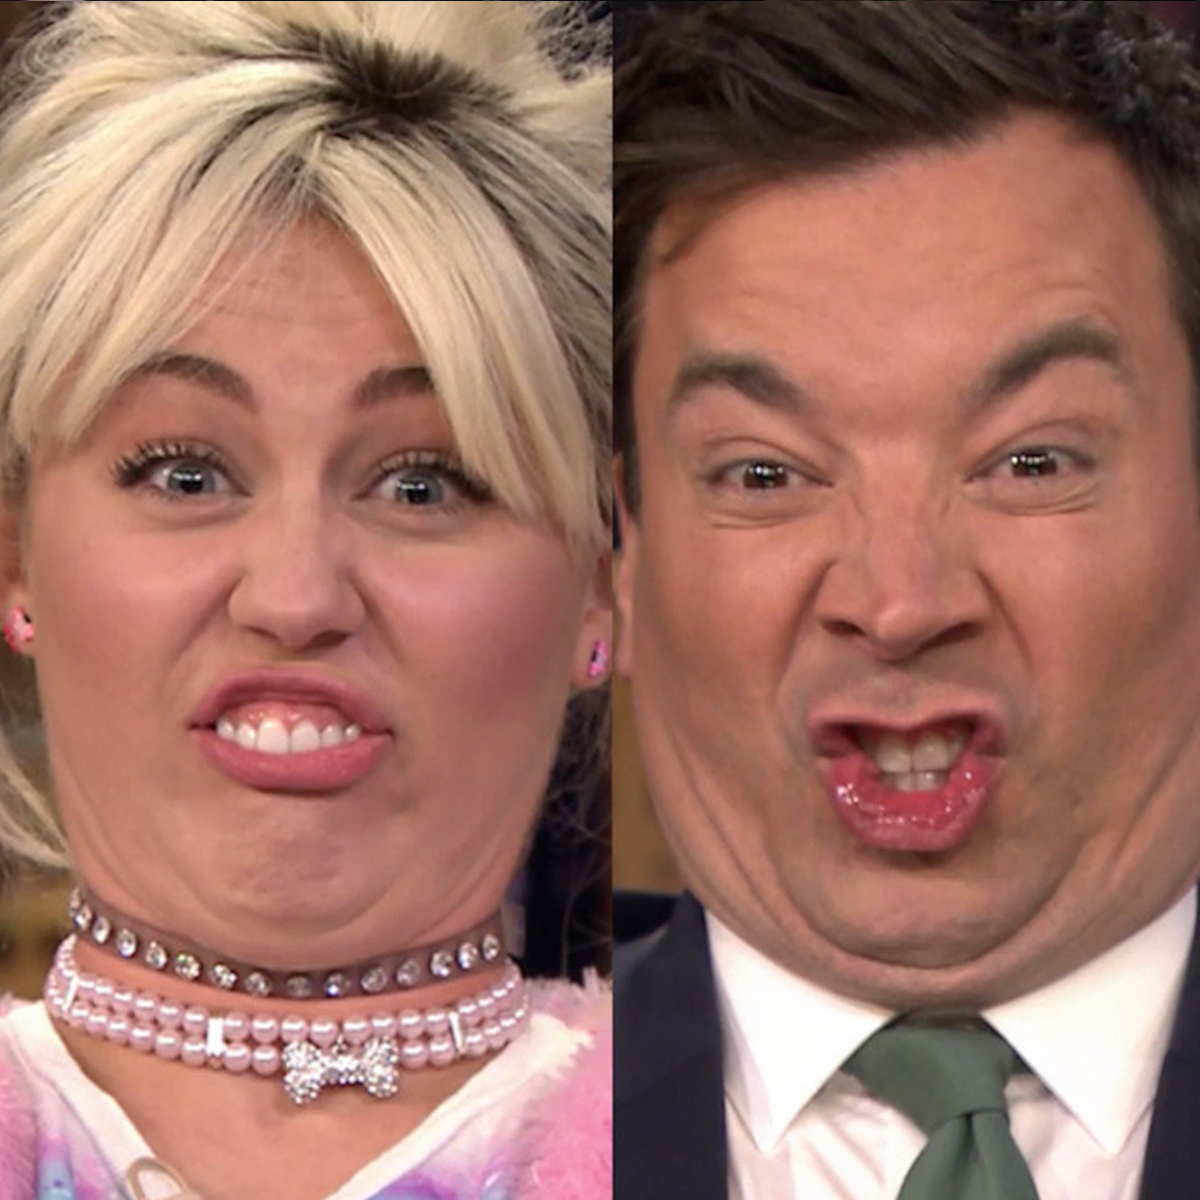 X Miley Cyrus And Jimmy Fallon Are Pros At Making Funny Faces News 8283